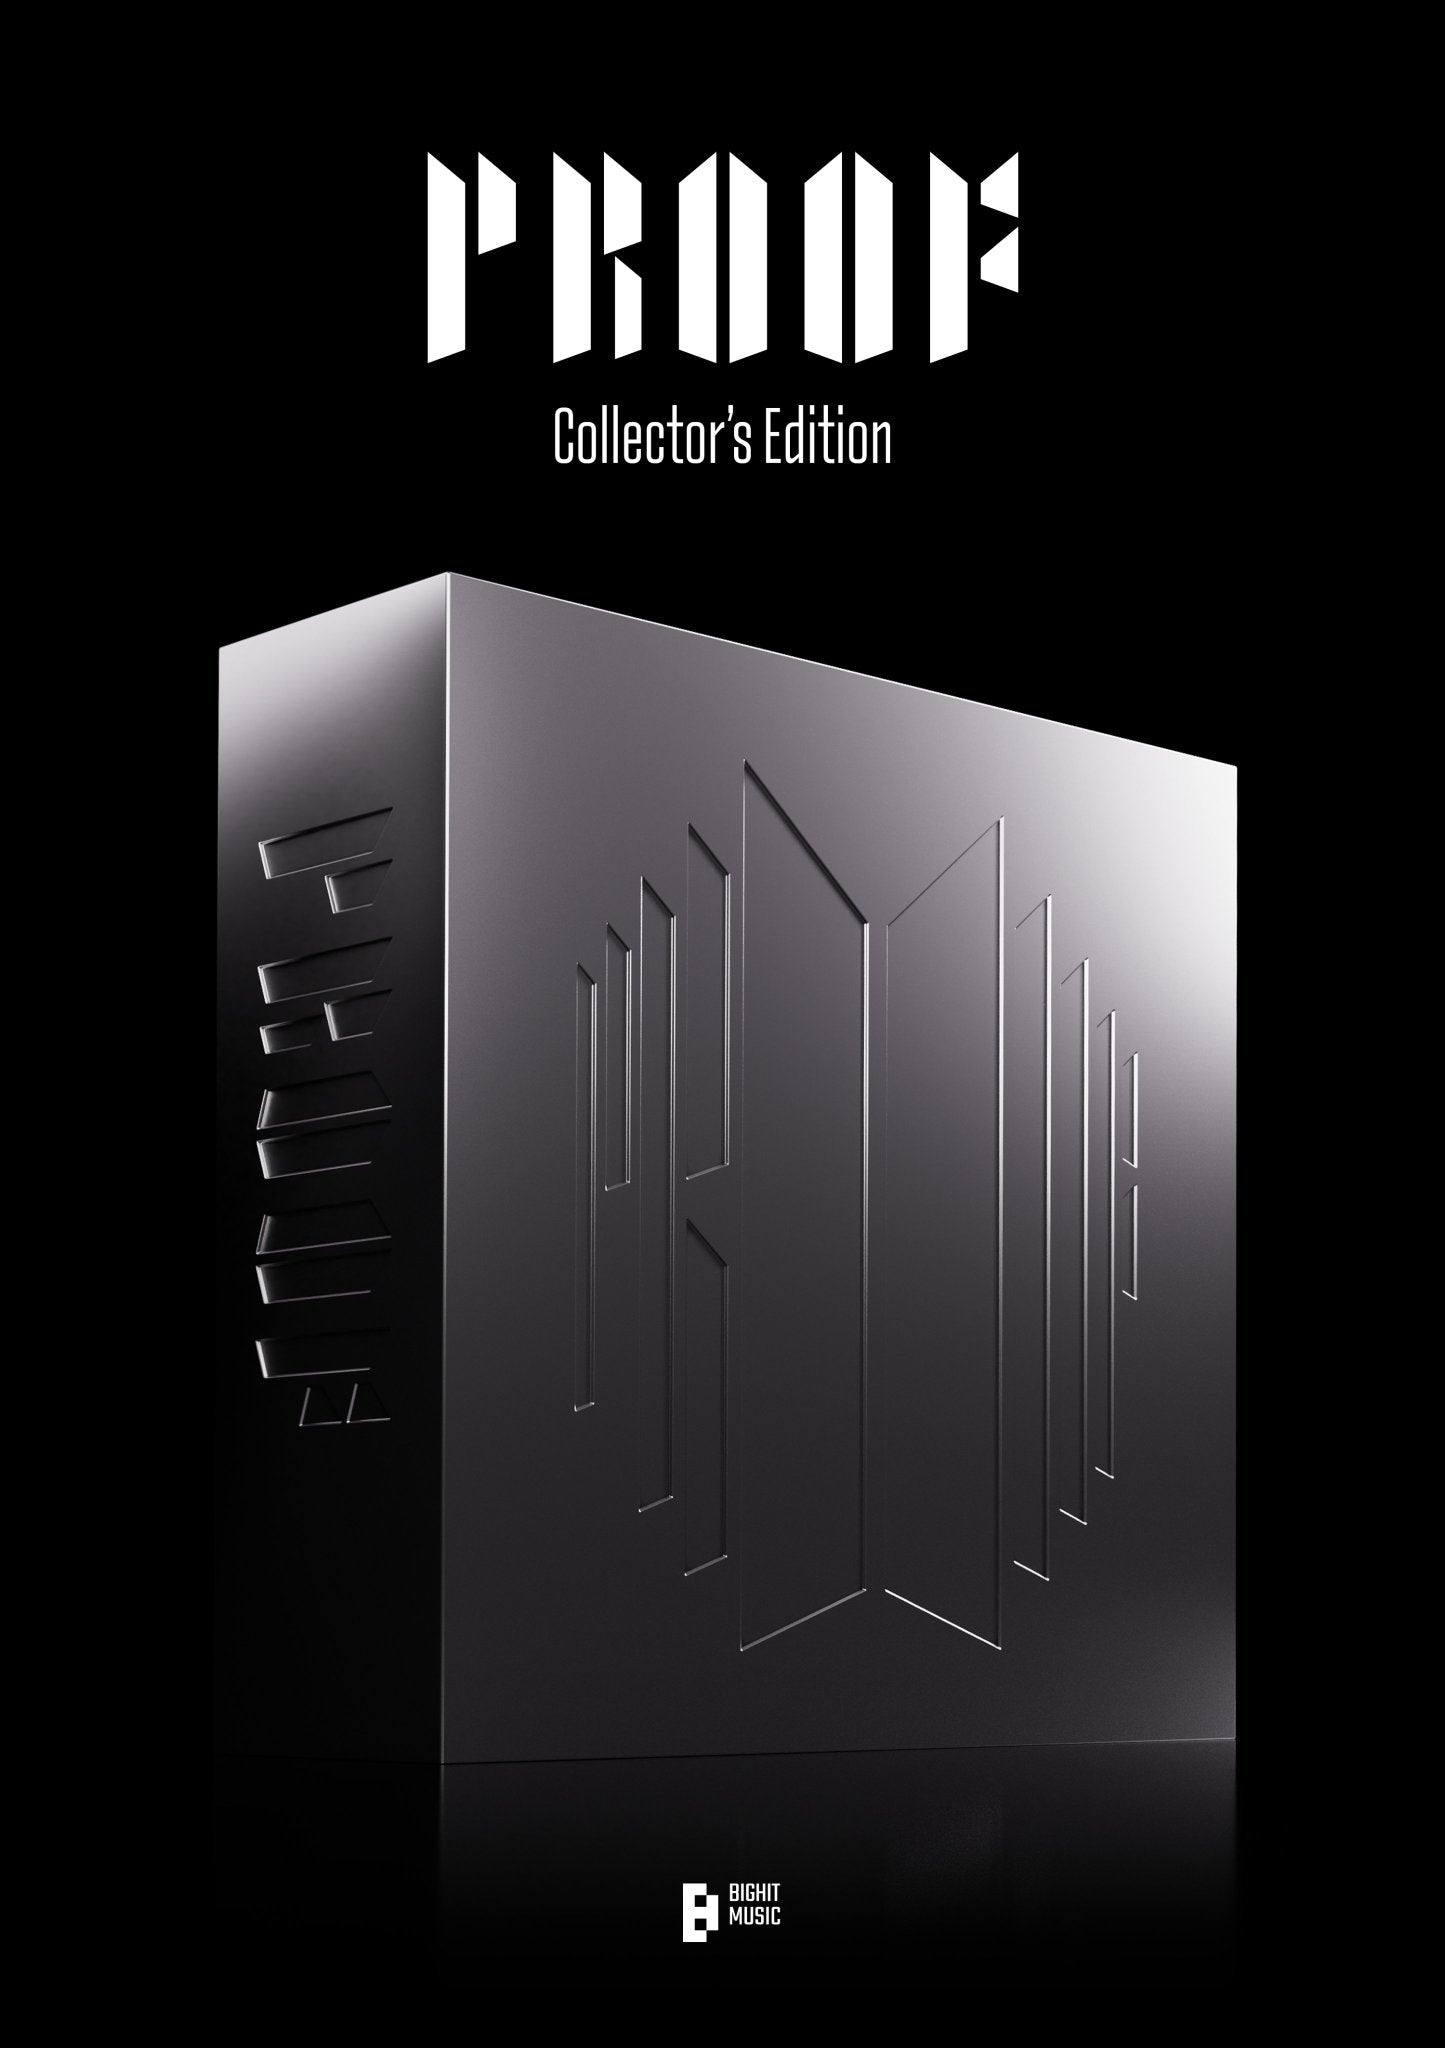 [BTS] Proof : Collector’s Edition